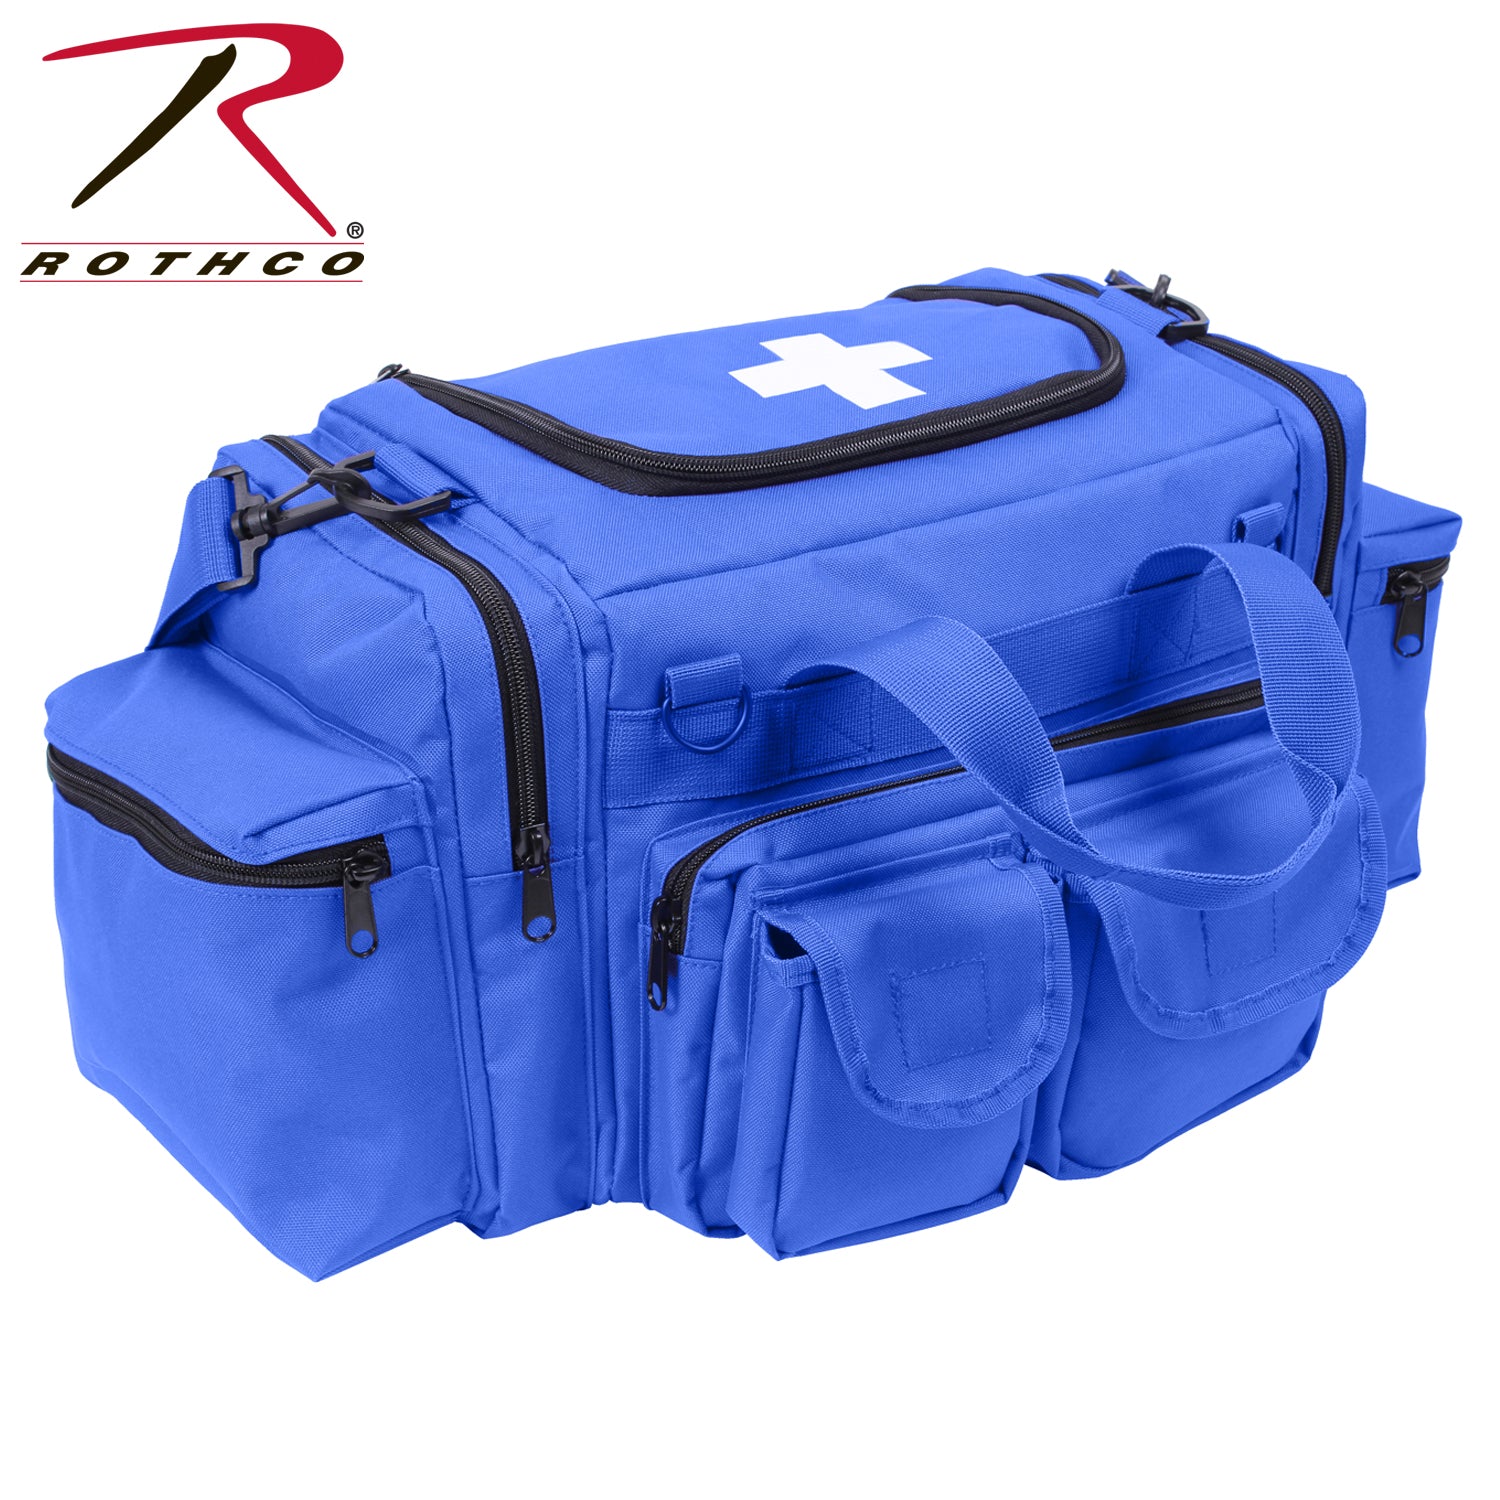 Deluxe Stocked Large EMT First Aid Trauma Bag Fill Kit w/ Emergency Medical  Supplies - Onesource Fire Rescue Equipment